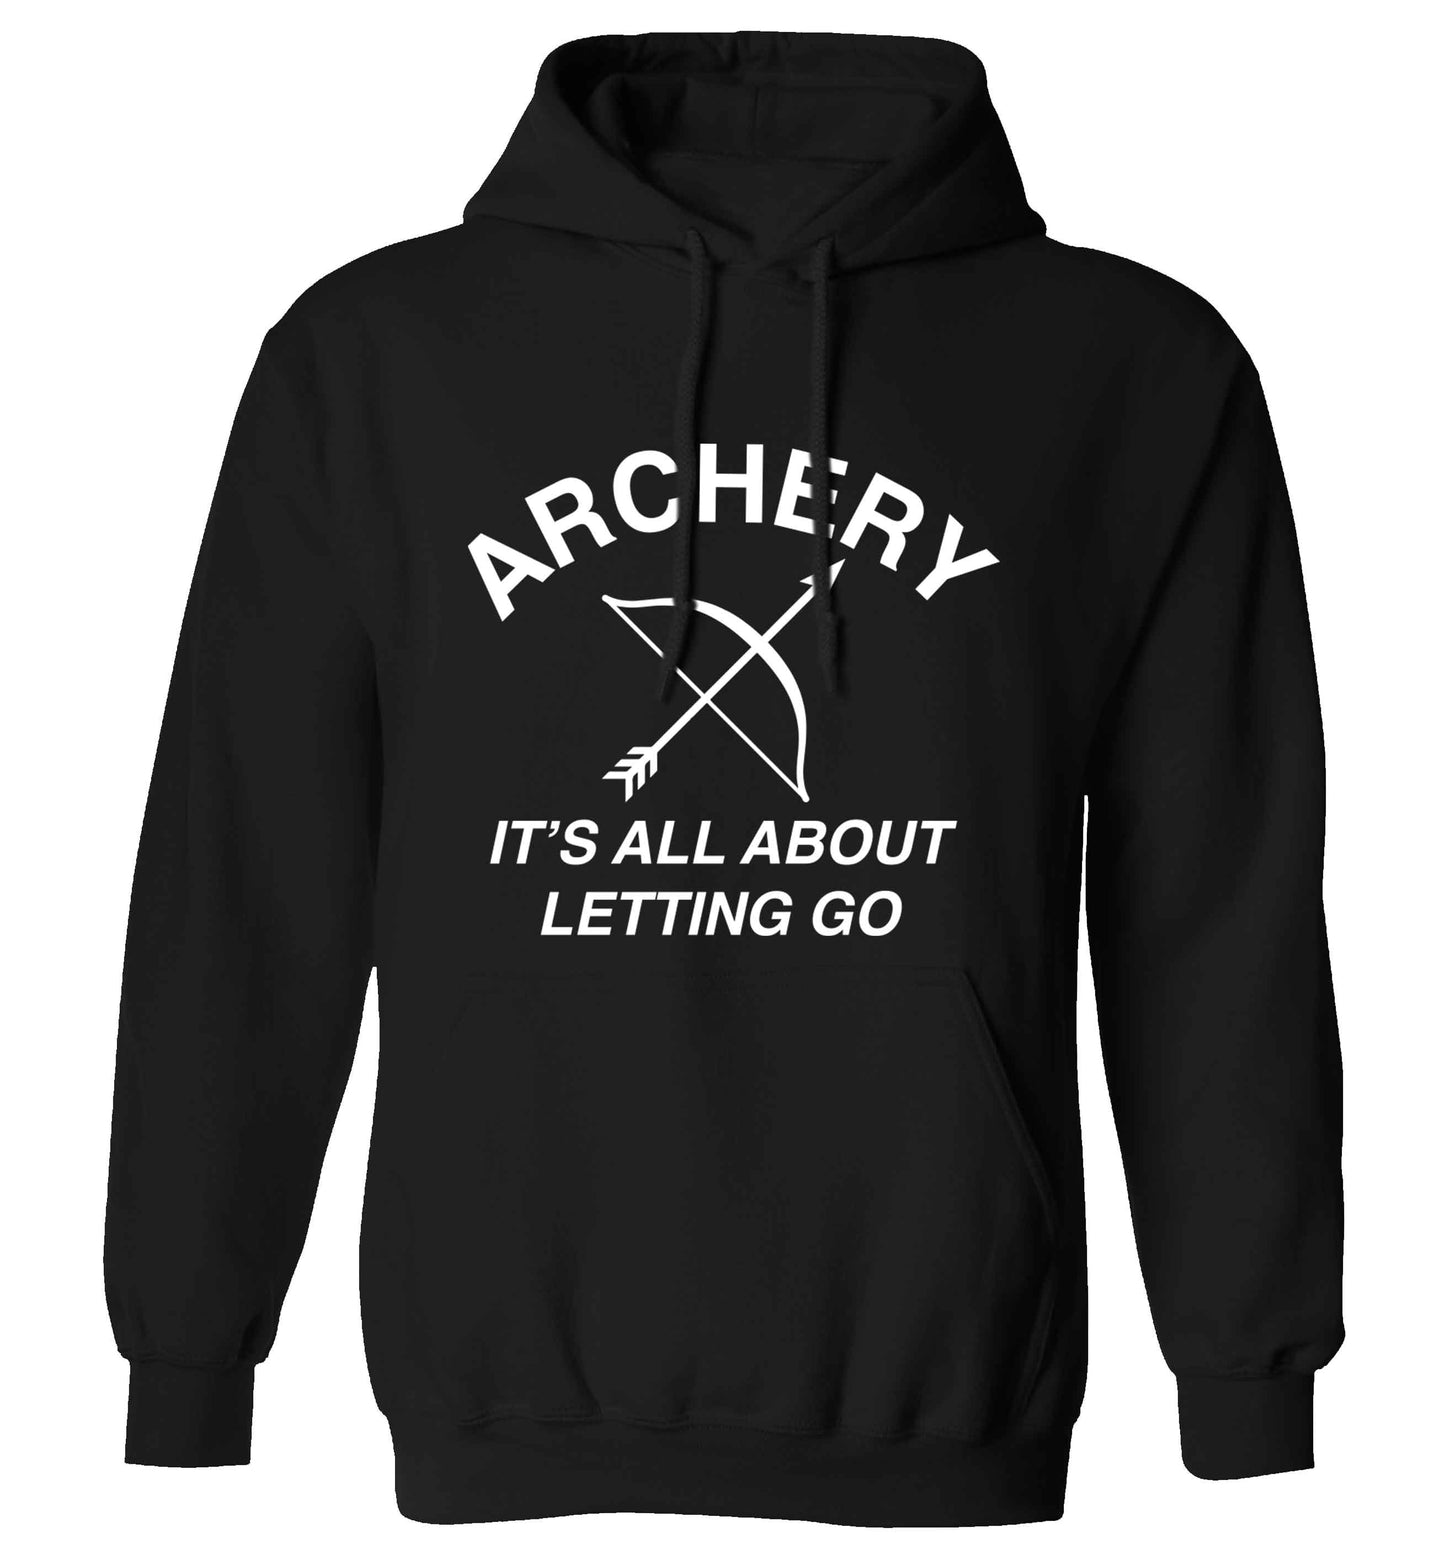 Archery it's all about letting go adults unisex black hoodie 2XL